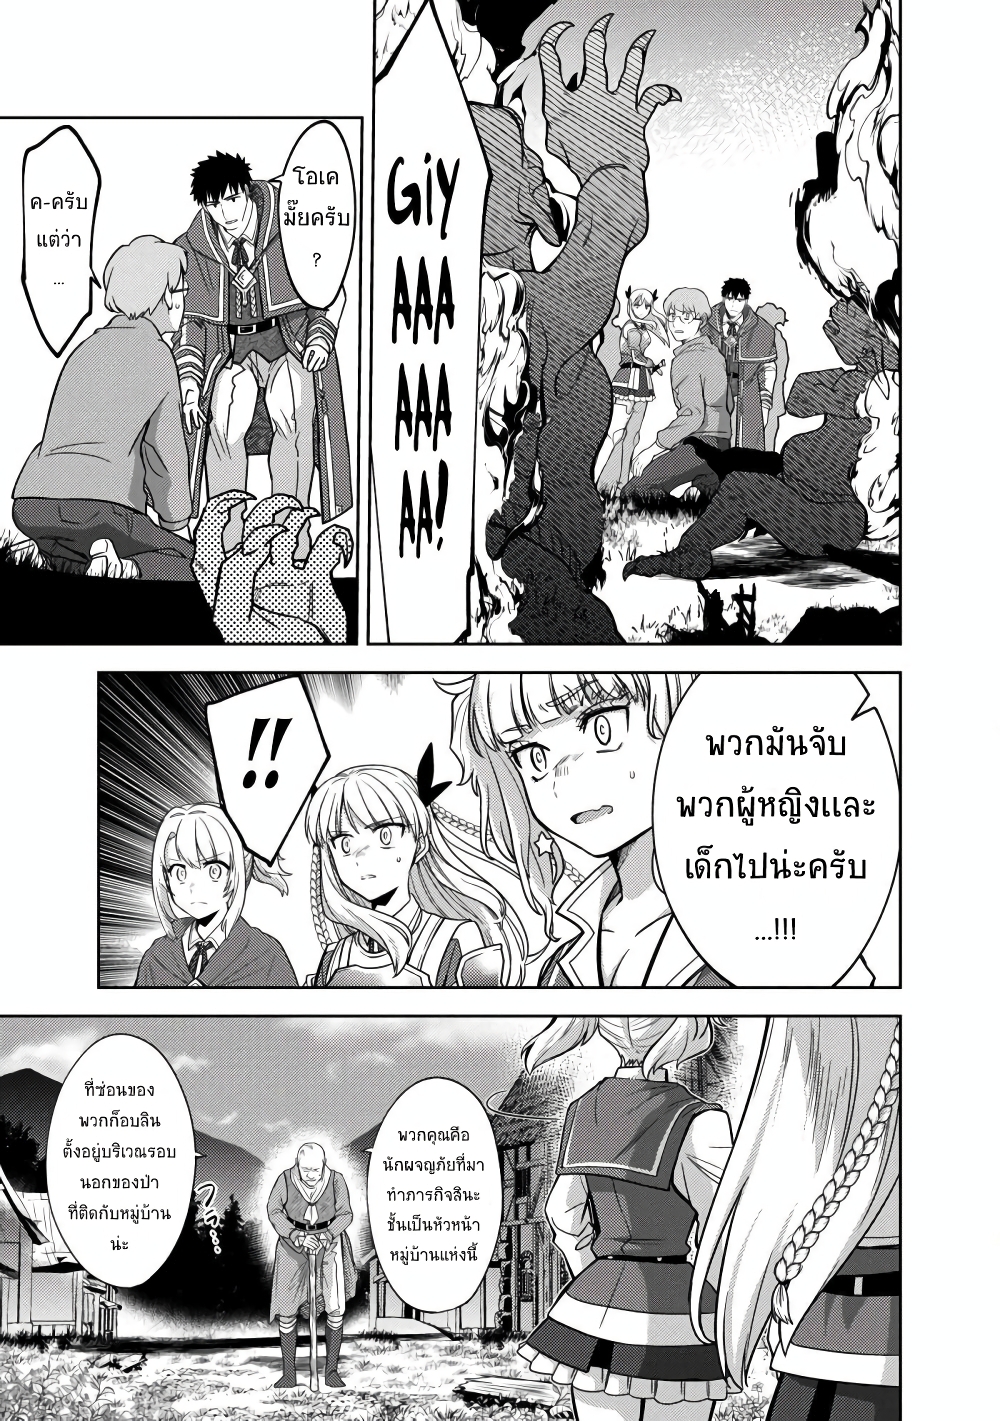 The Reincarnated Swordsman With 9999 Strength Wants to Become a Magician! ตอนที่ 6 (10)